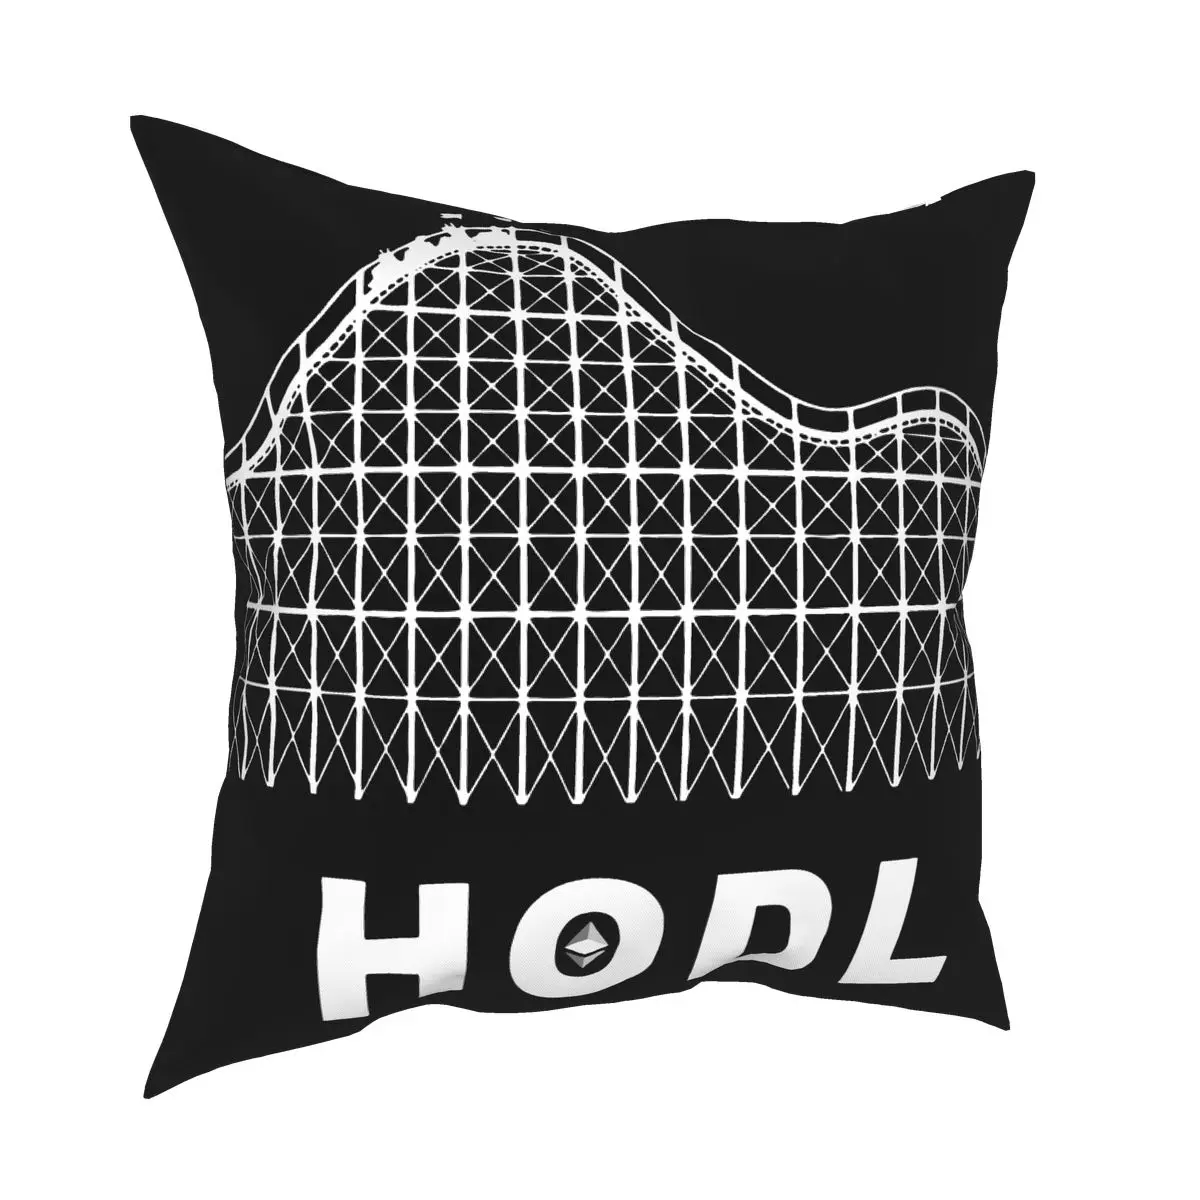 

Bitcoin Hodl Cryptocurrency Crypto Trader Ethereum Throw Pillow Cover Throw Pillow Btc Blockchain Novelty Cushion Covers